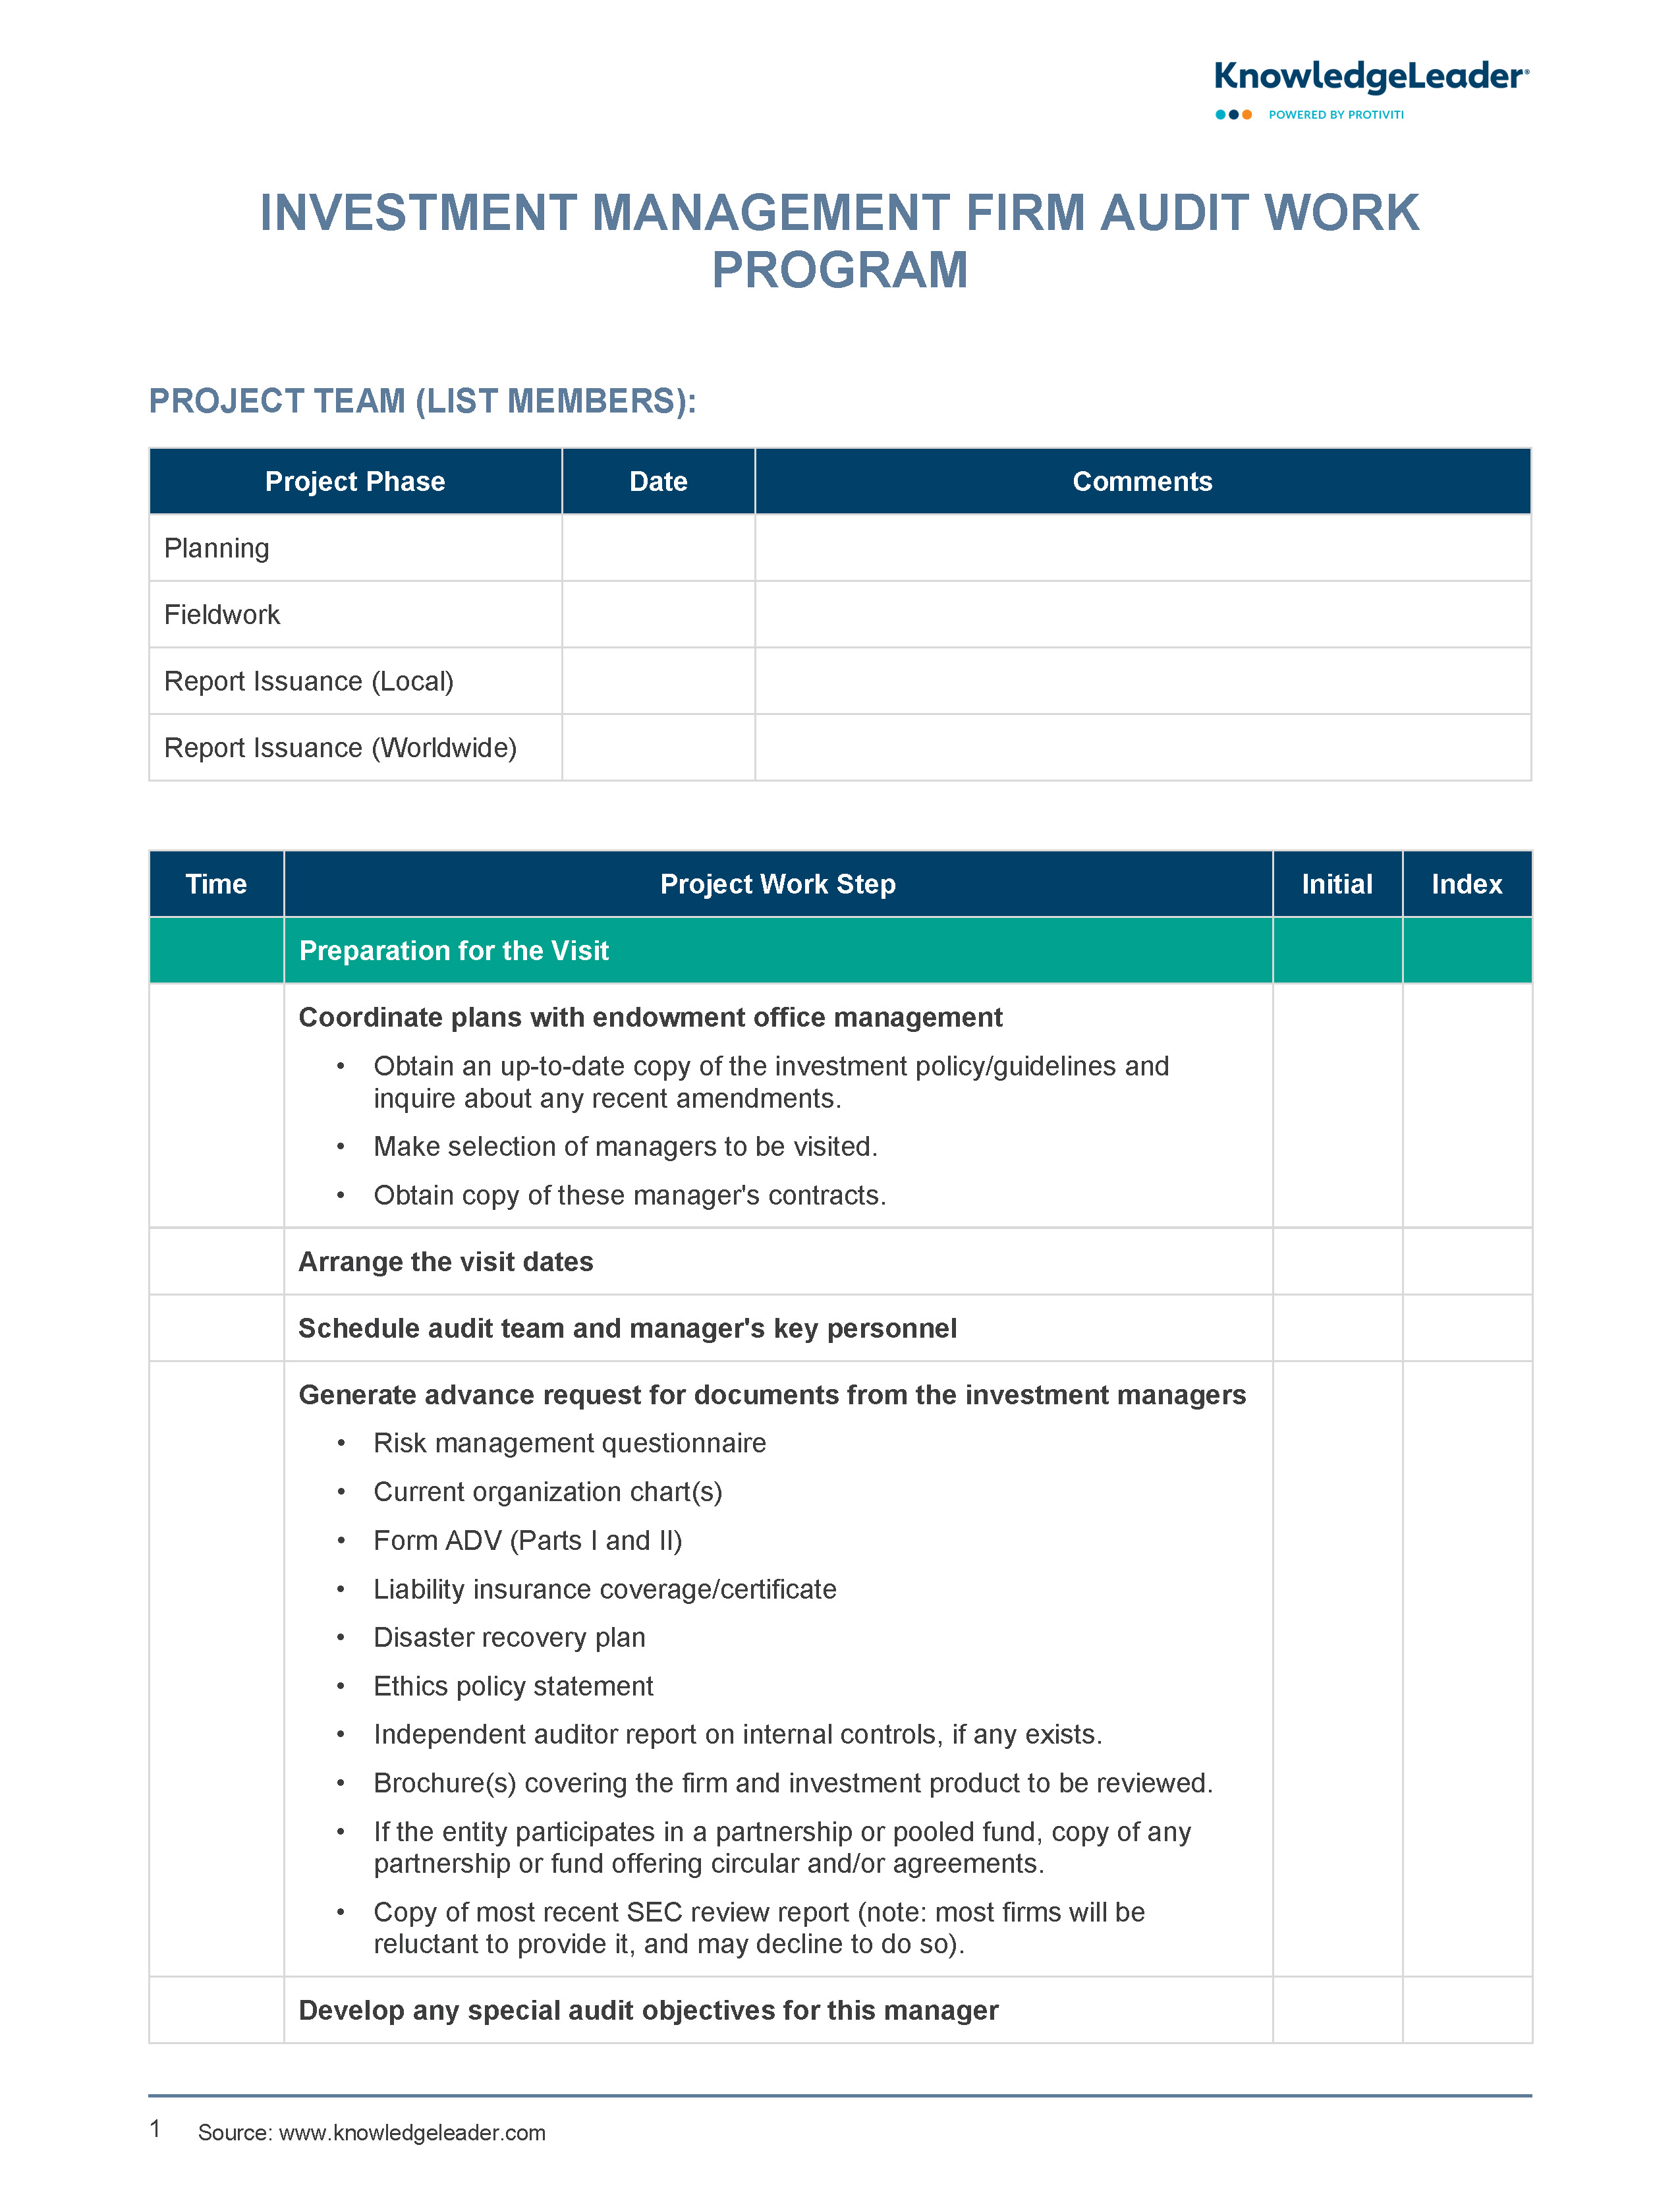 Screenshot of the first page of Investment Management Firm Audit Work Program